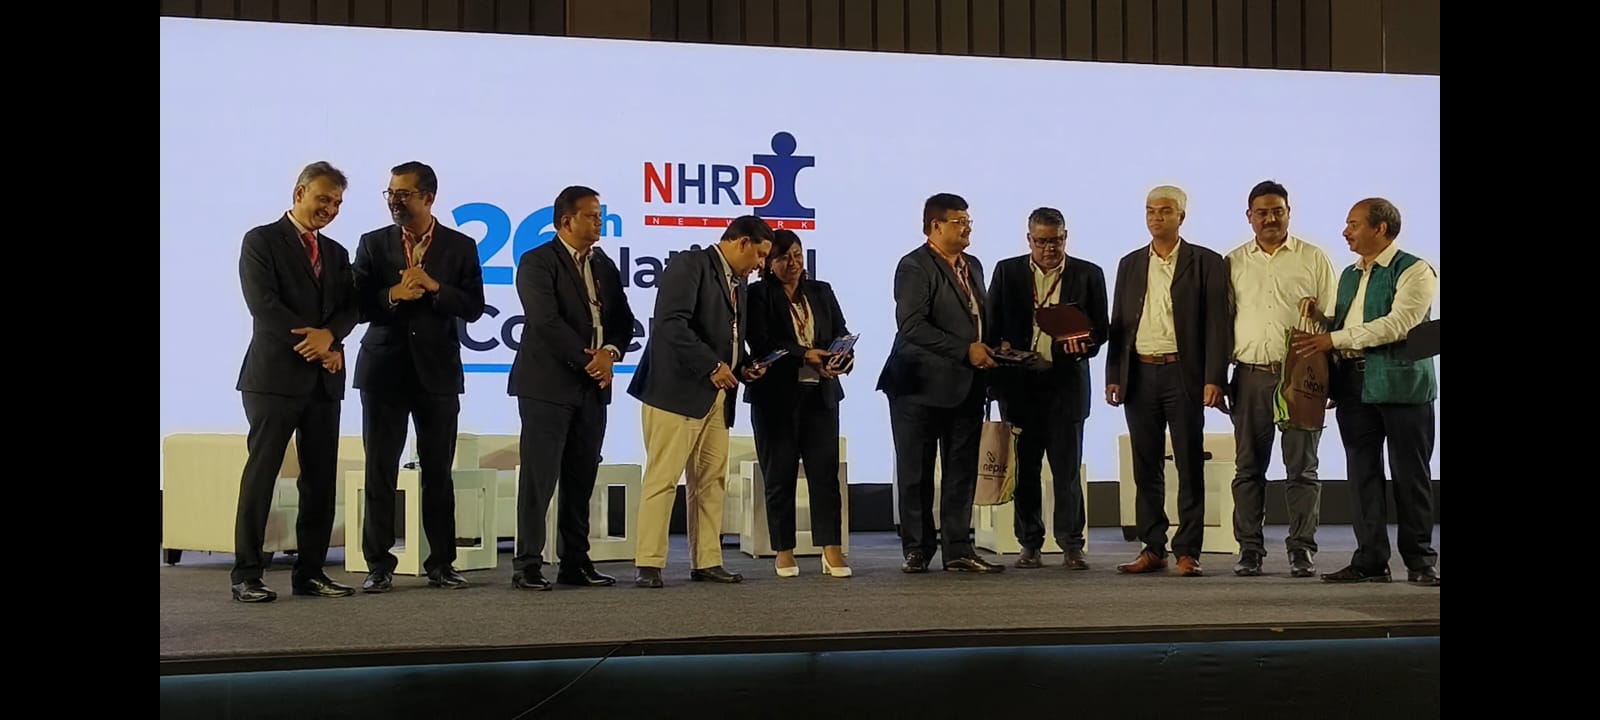 NHRDN’s 26th National Conference - “Beyond Tomorrow” sheds light on the Future HR Trends